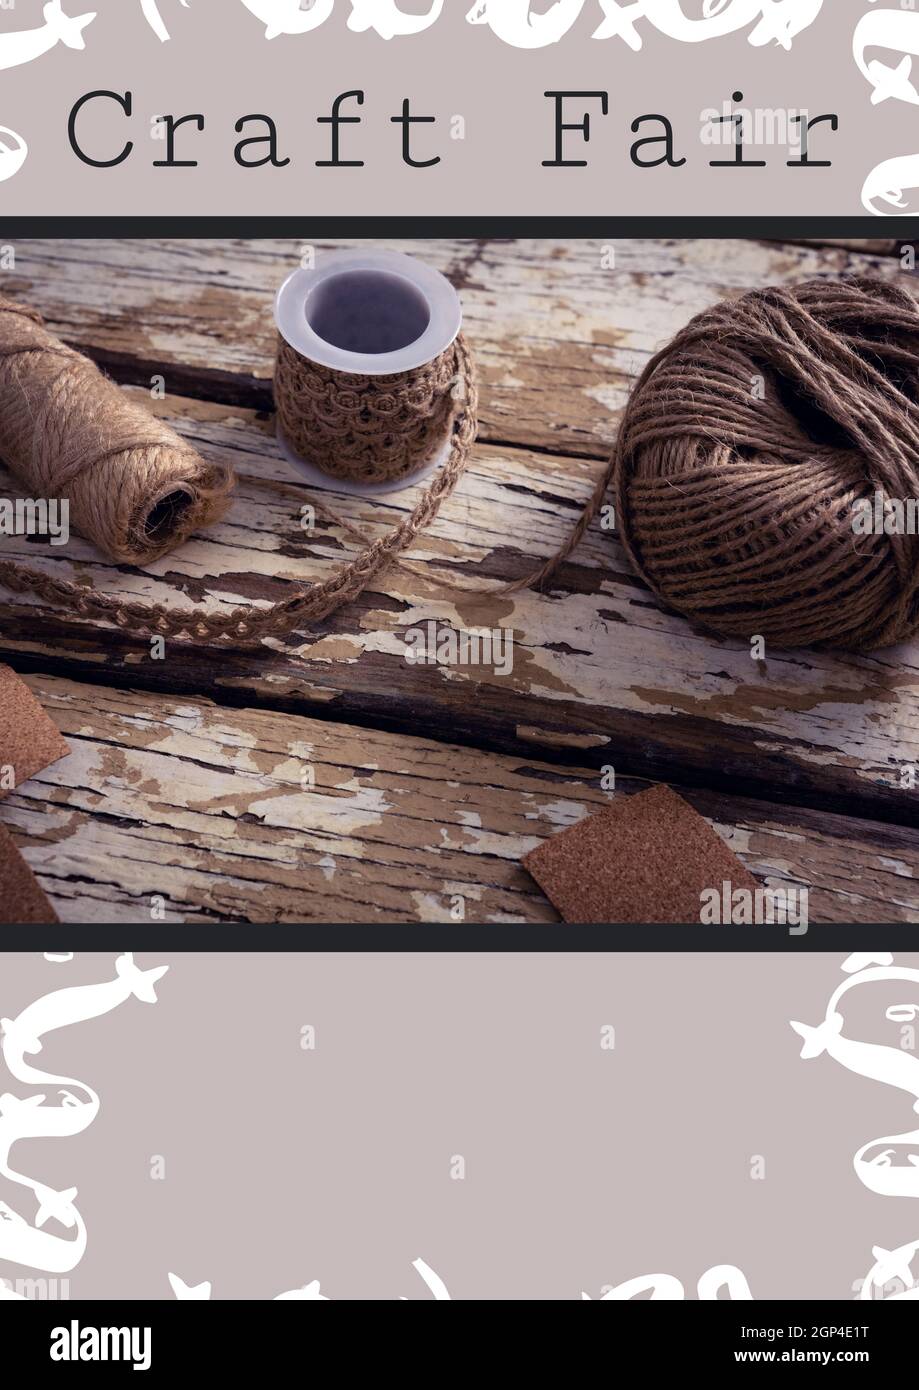 Composition of craft fair text and yarns on grey background Stock Photo